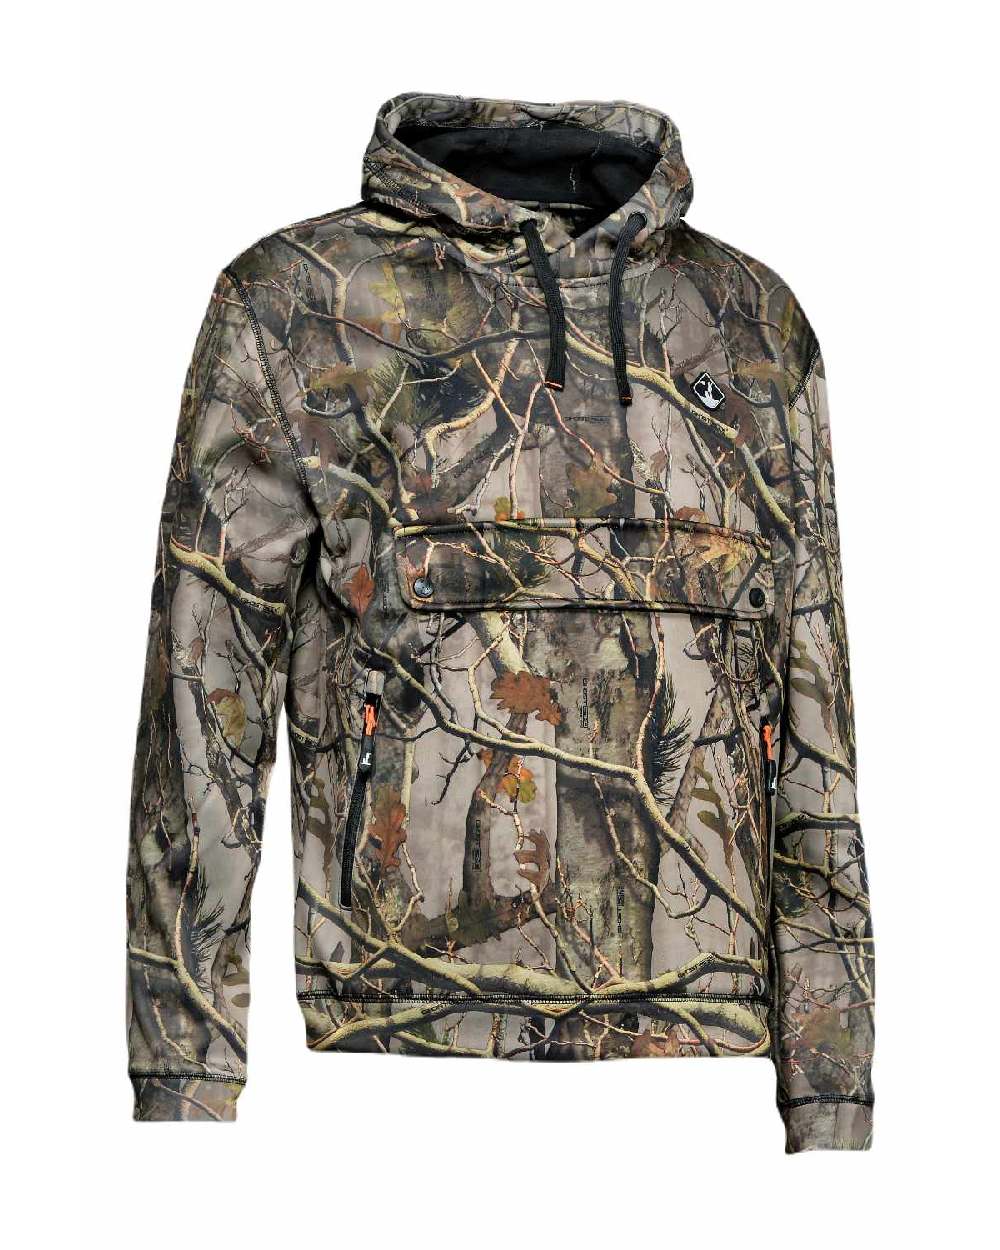 Percussion Hooded Sweatshirt in Ghostcamo Forest Evo 